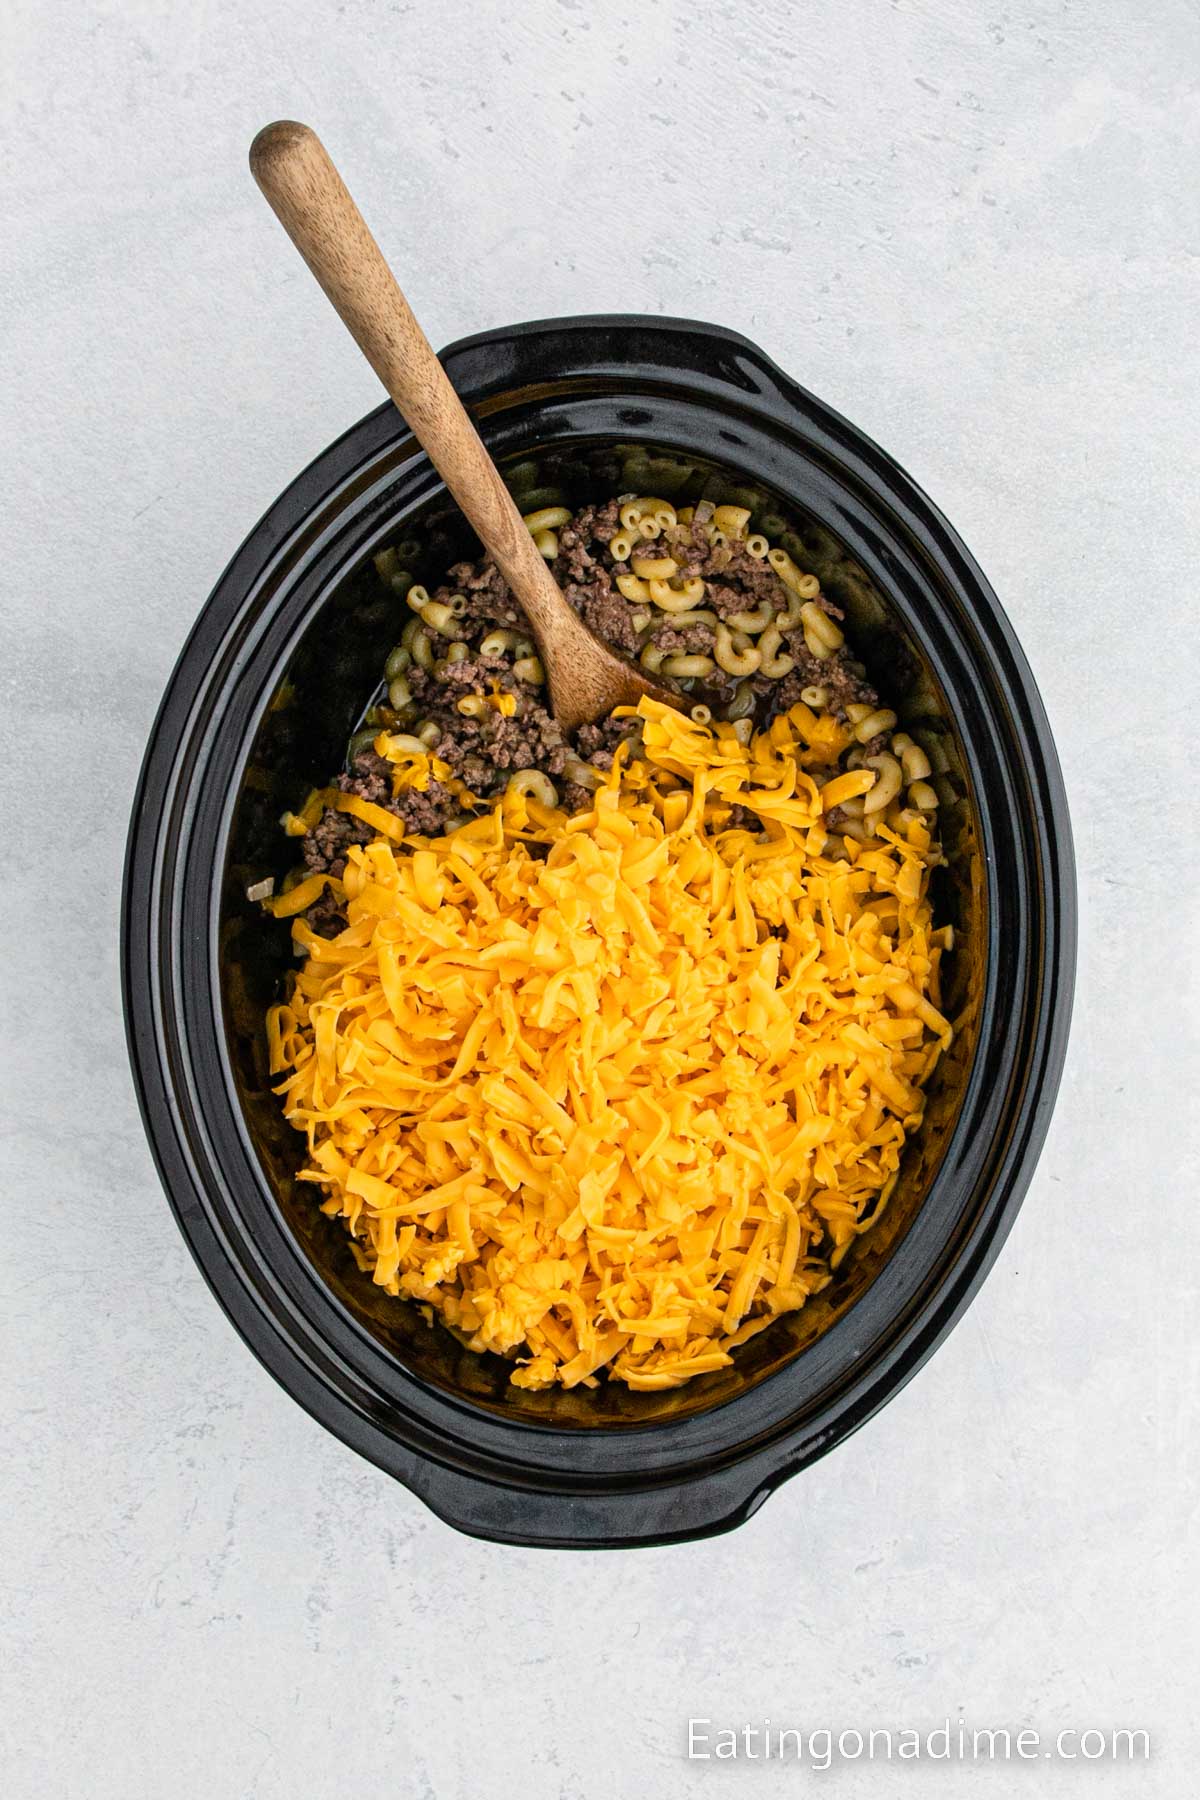 Topping the shredded cheese in the cheeeseburger mixture in the slow cooker with a wooden spoon